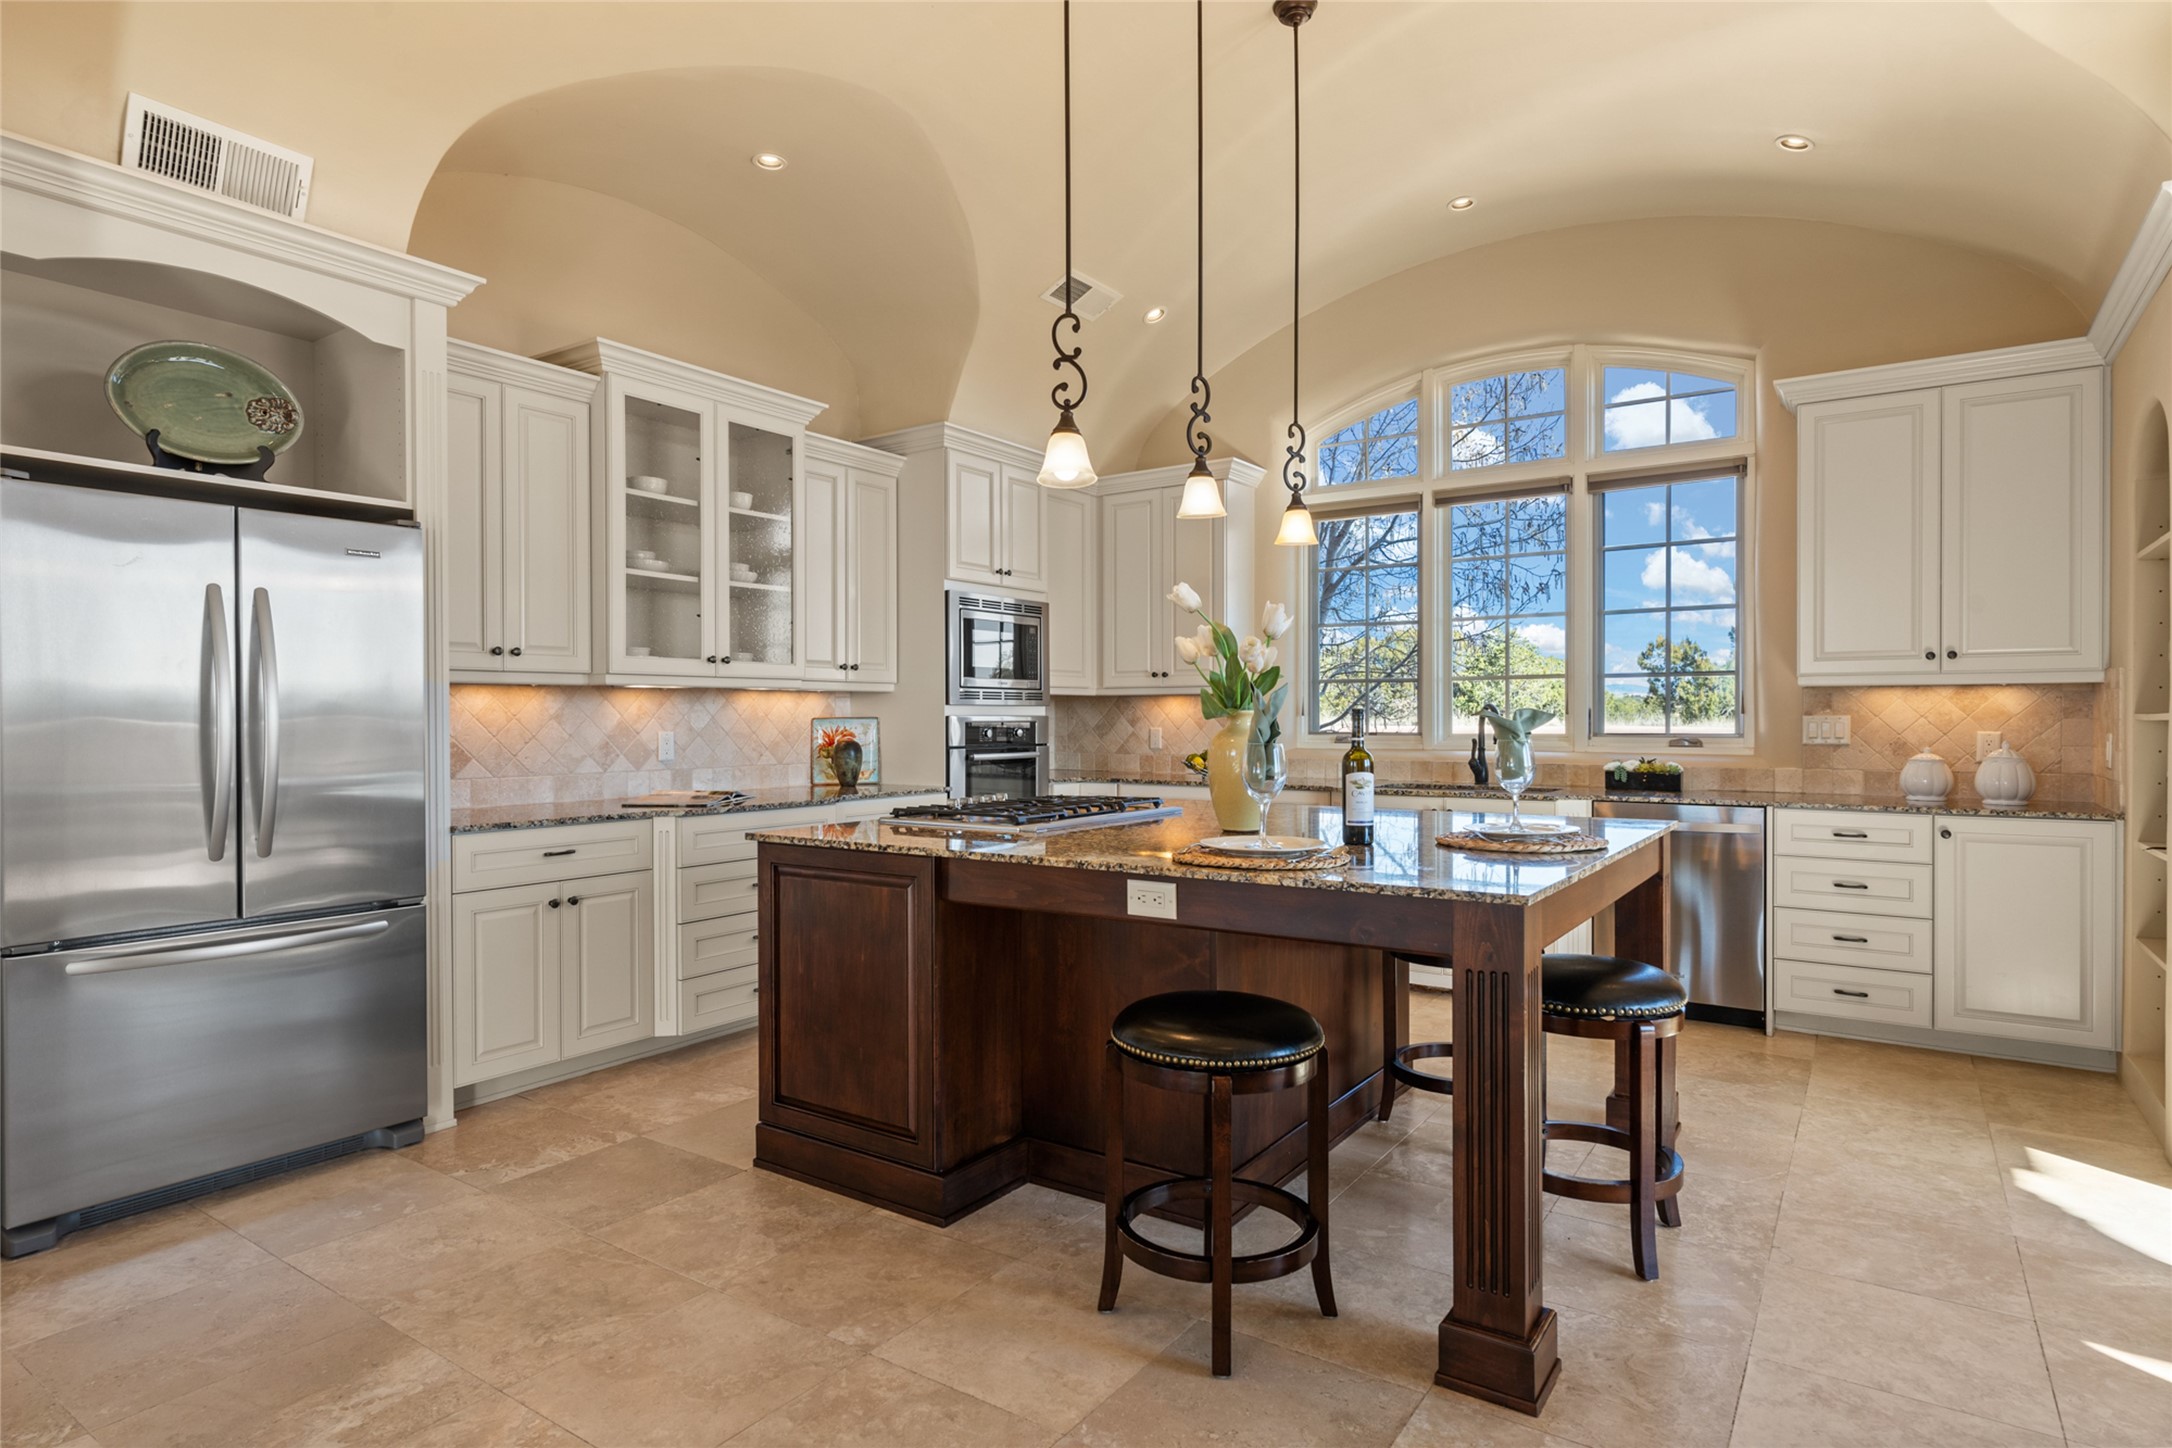 Spacious Kitchen area for Cooking and Entertaining